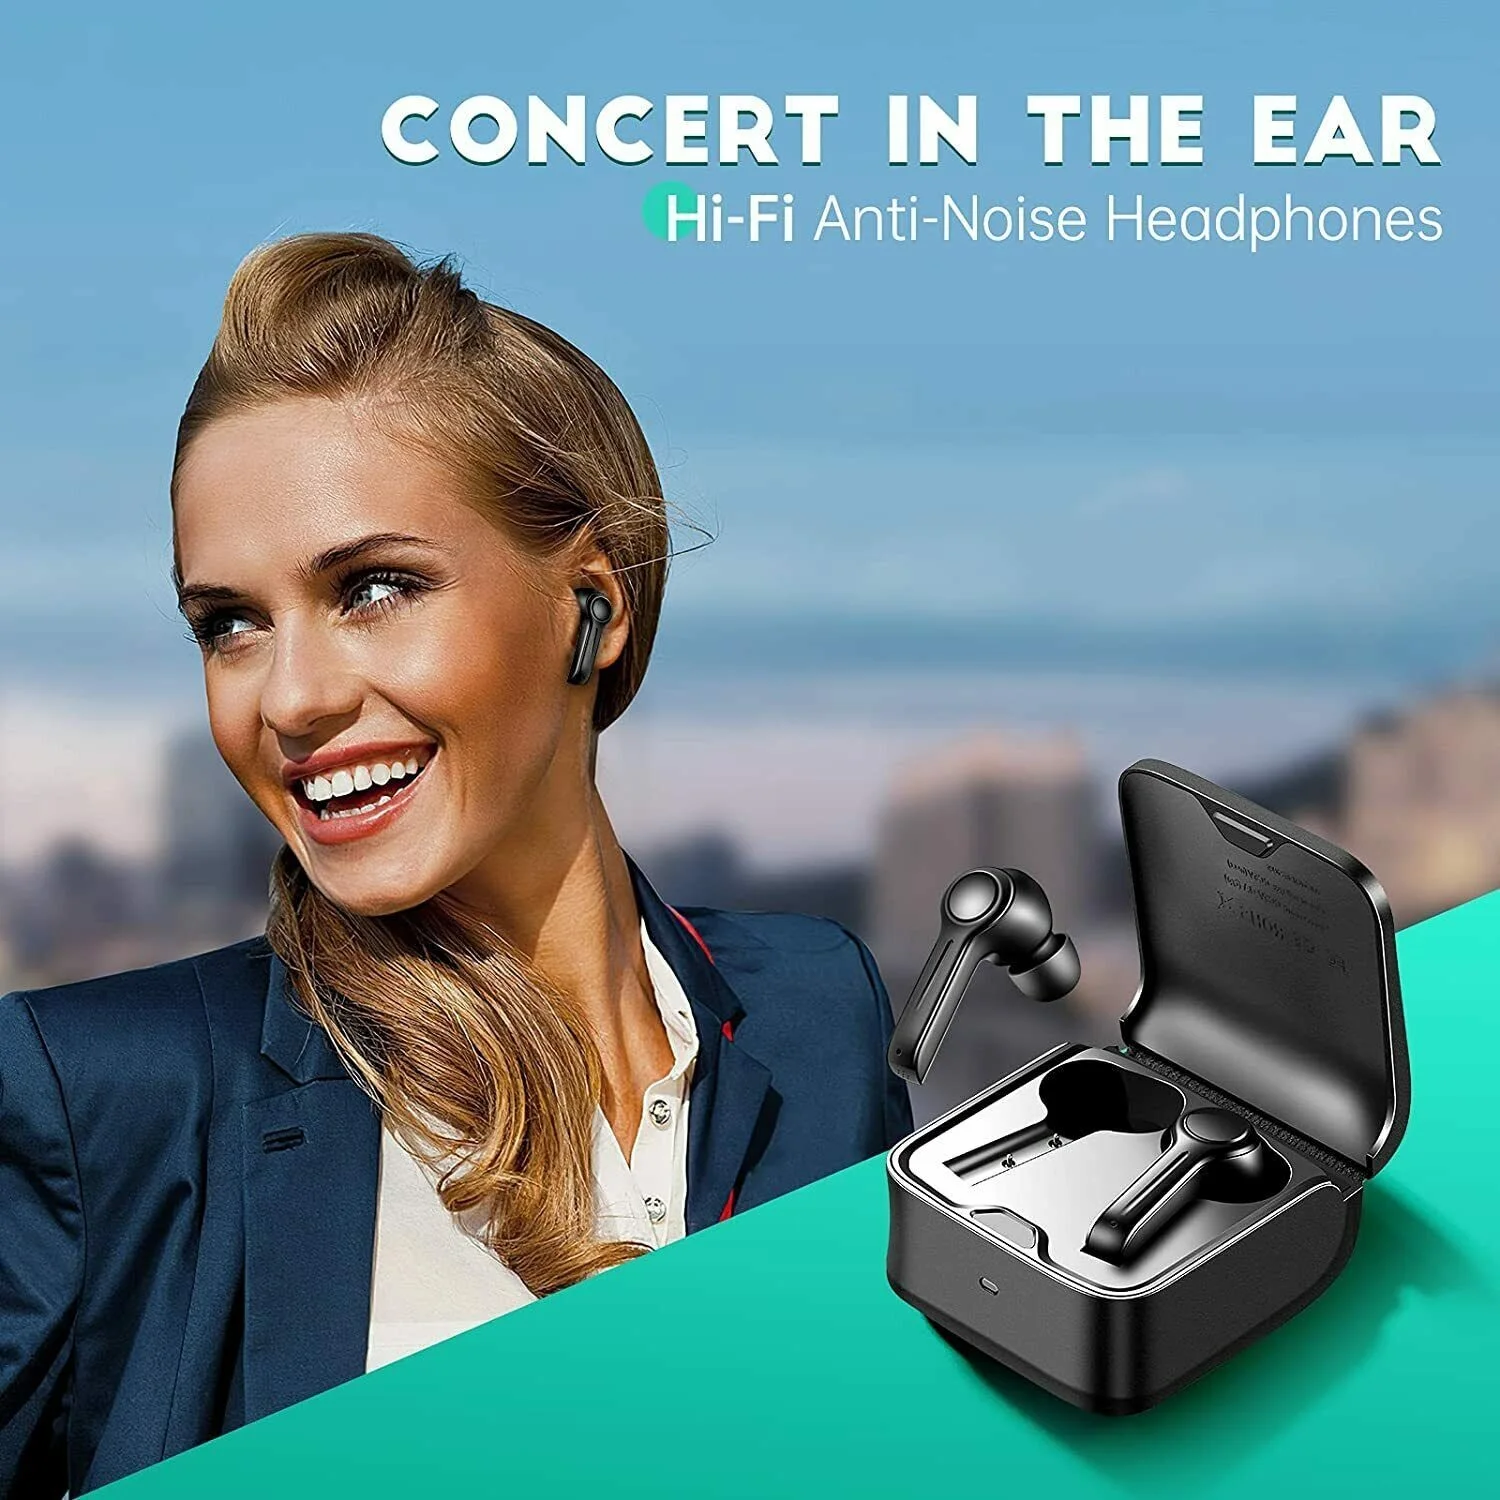 Wireless Earbuds, Bluetooth Headphones In Ear Running Earphones with Noise Cance enlarge